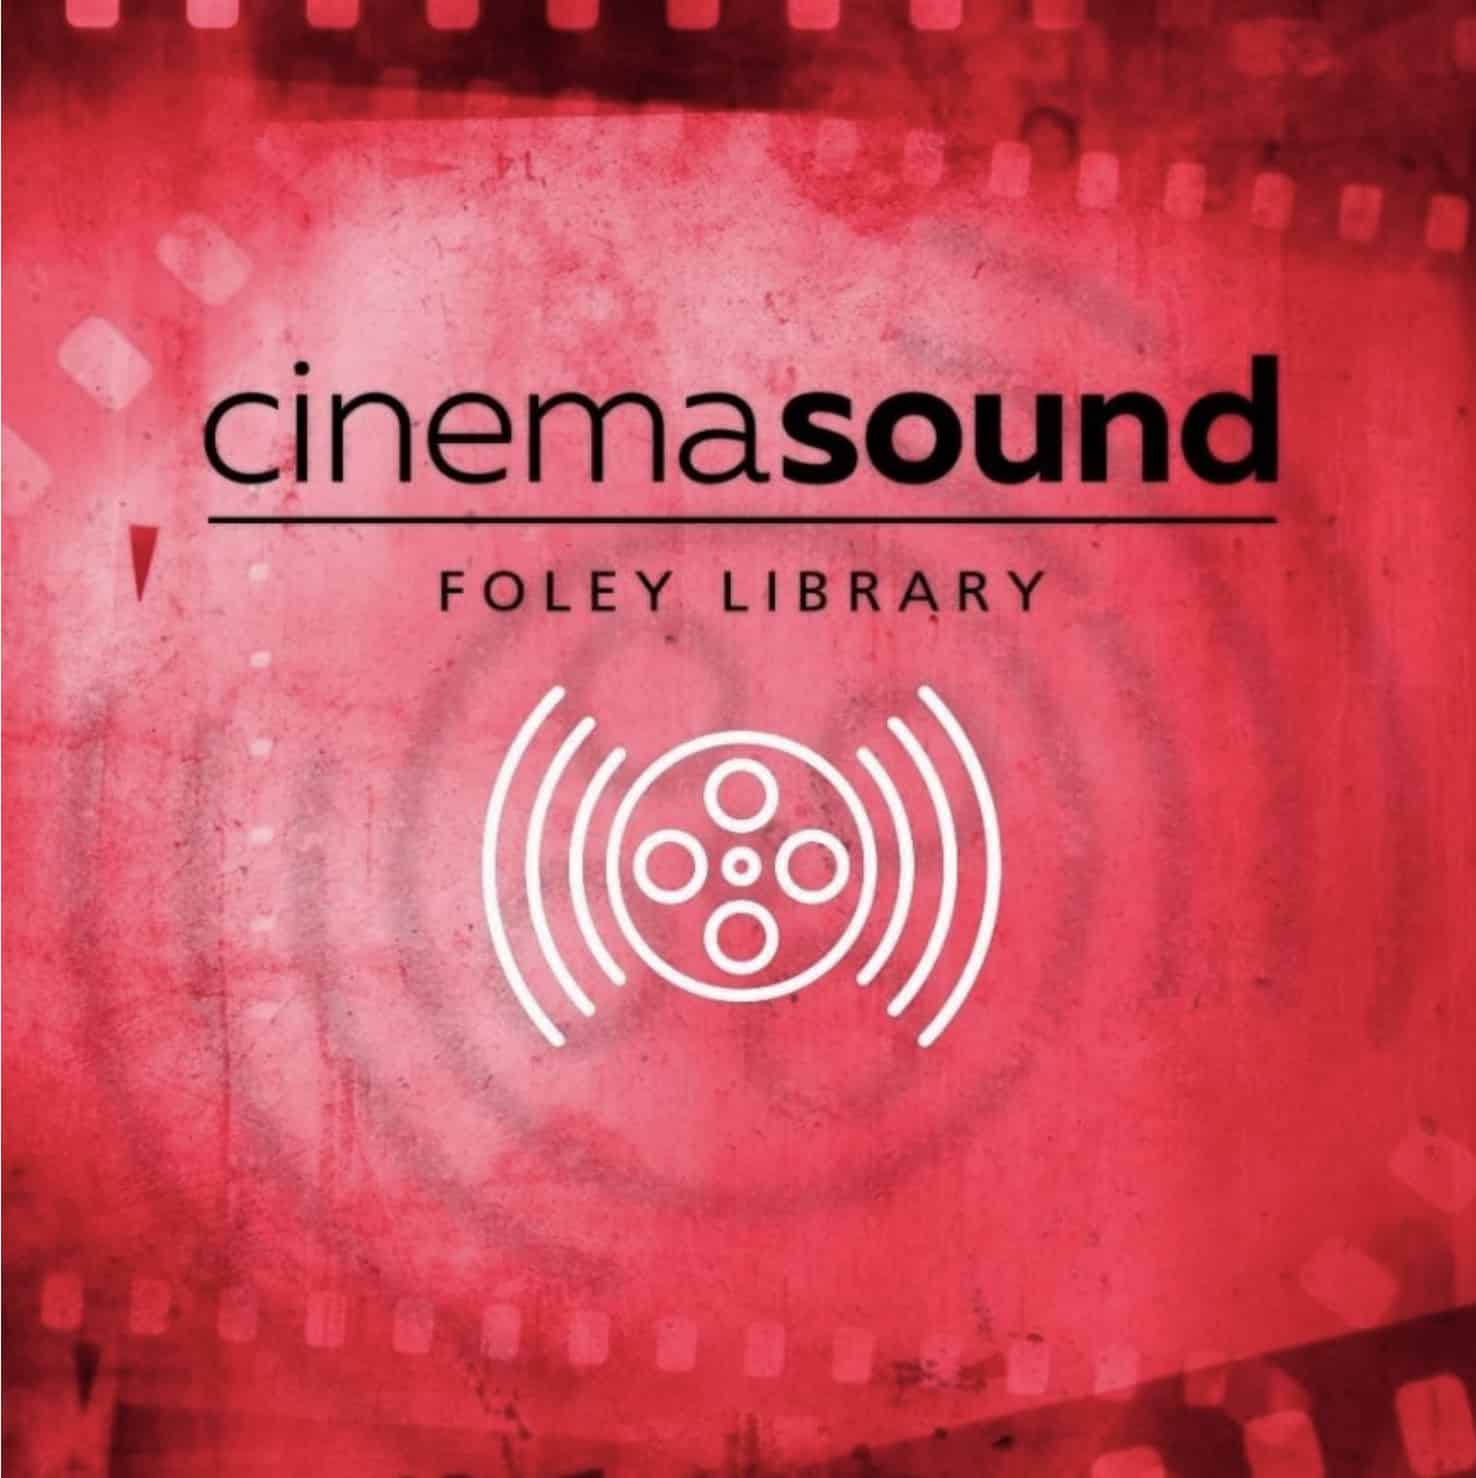 Cinema Sound Foley Library by Impact Soundworks